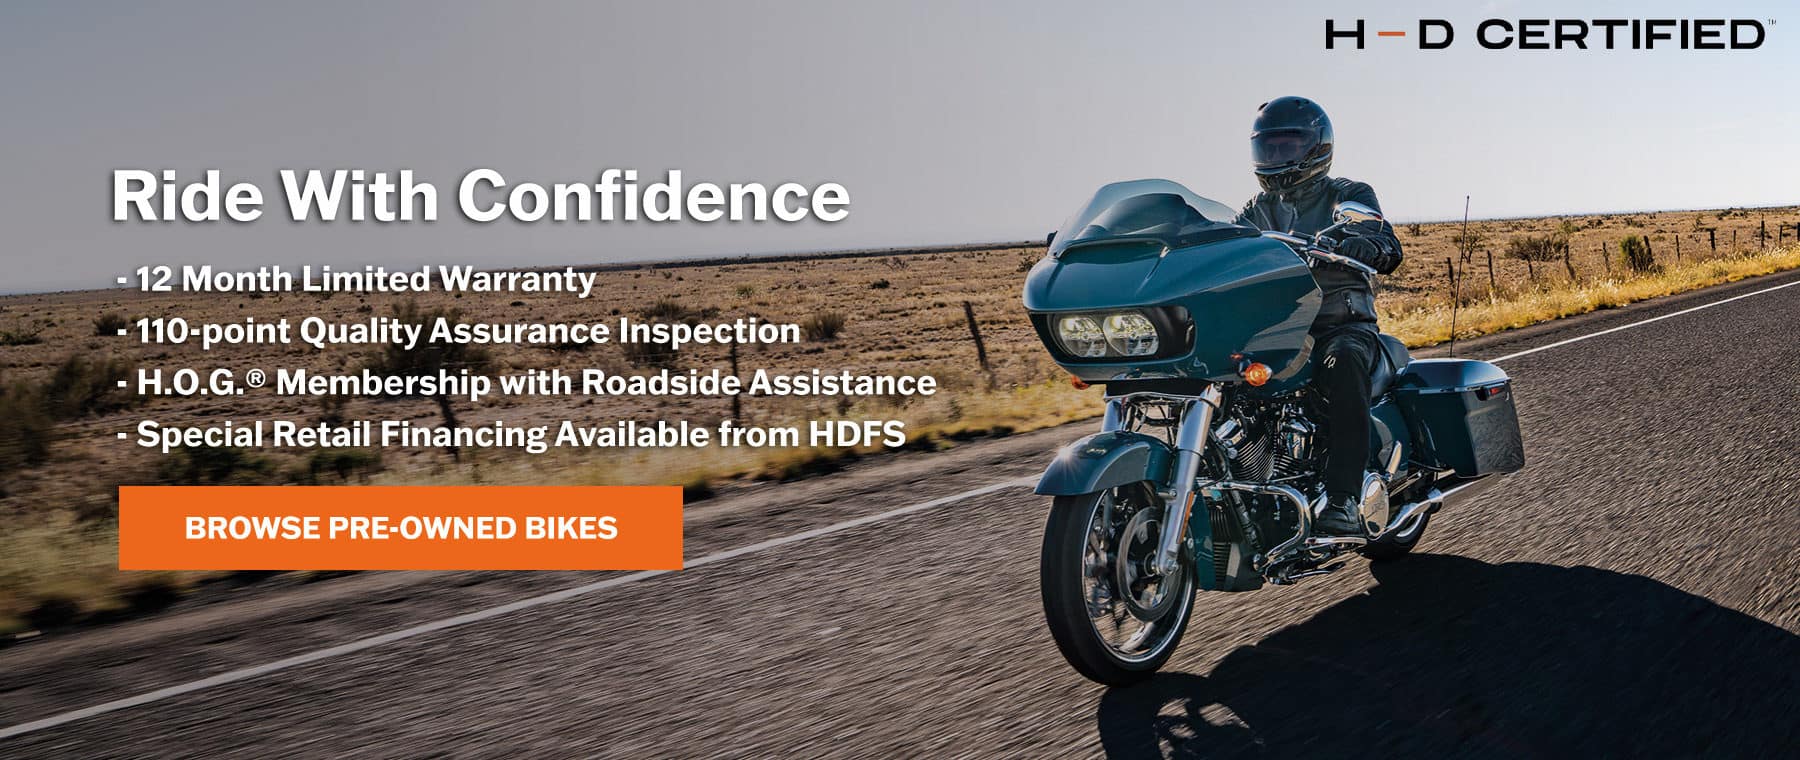 Harley-Davidson Certified Pre-Owned